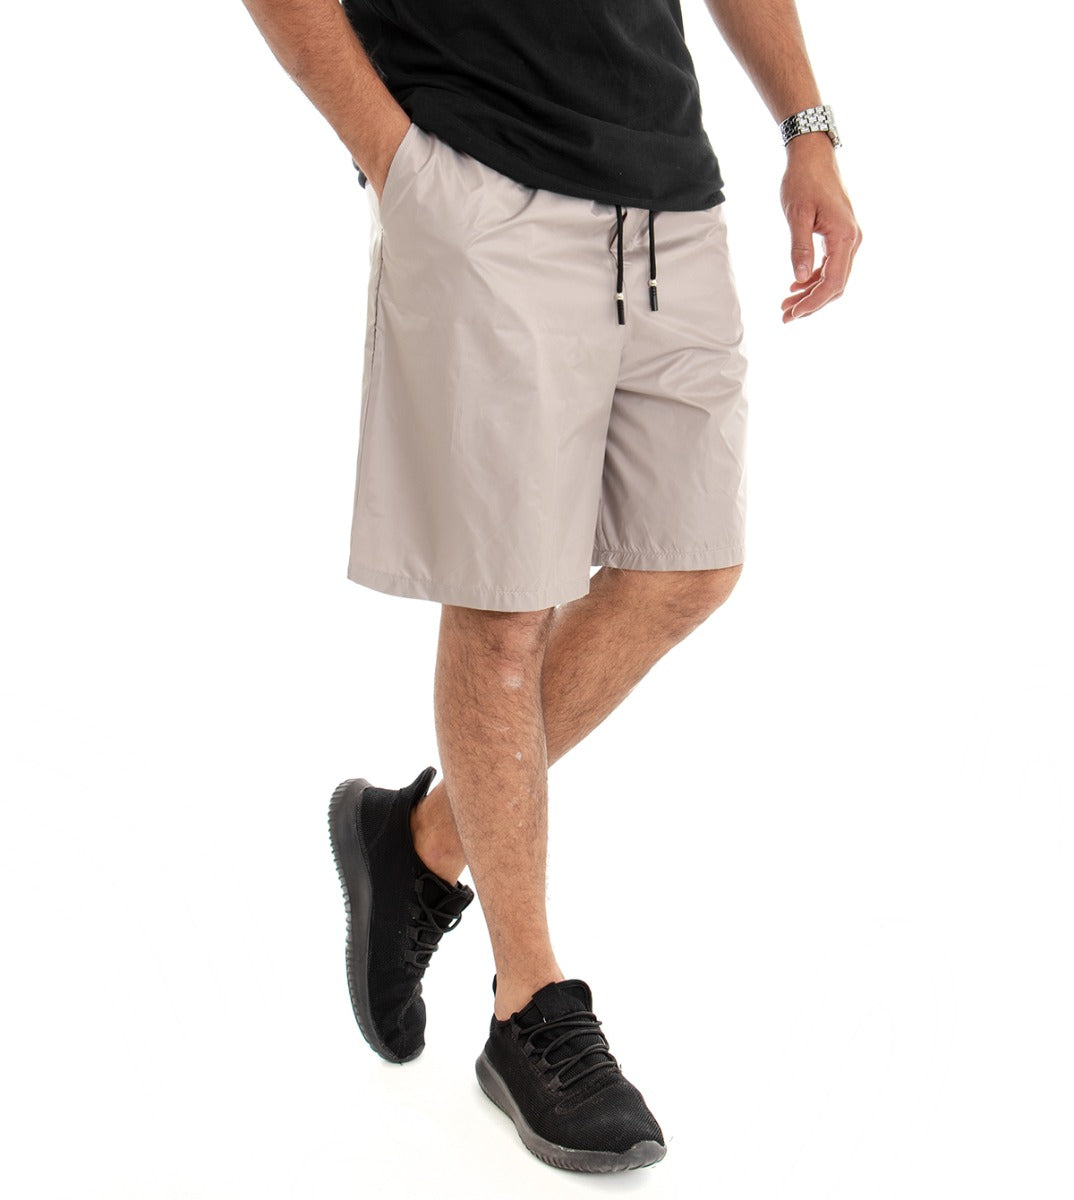 Bermuda Men's Shorts Over Solid Color Beige GIOSAL-PC1486A